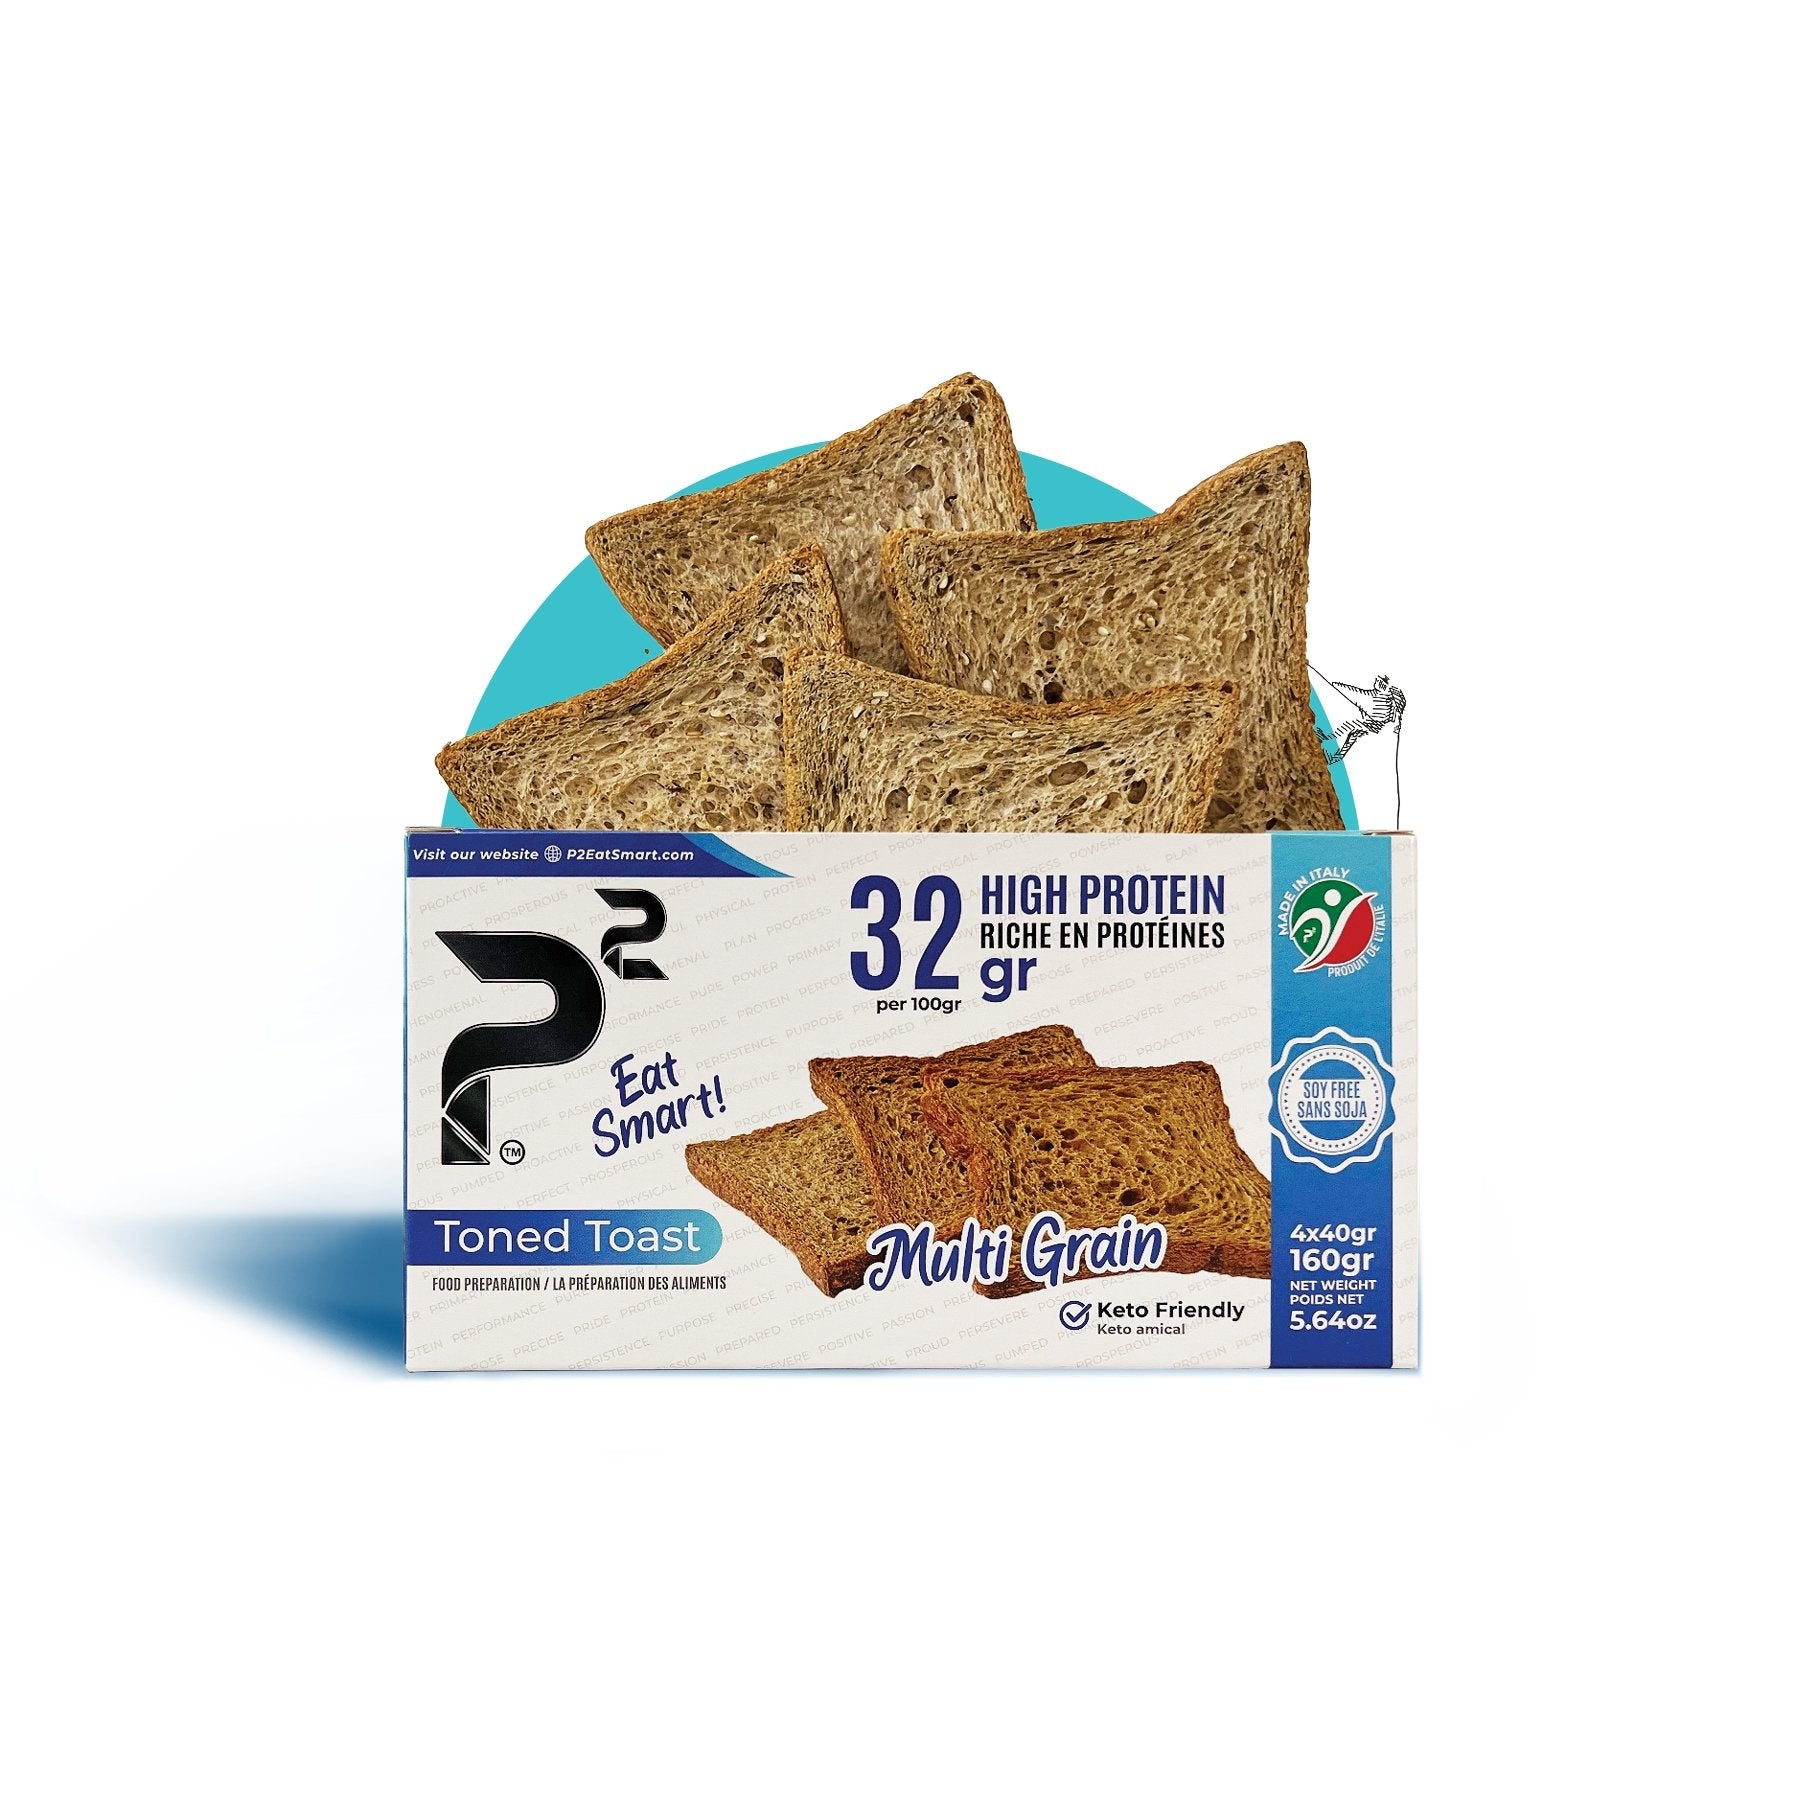 Toned Toast Multi Grain. High protein. Low carbs. 44g protein and 8g net carbs per 100g. No added sugar, Soy free, No flour, Lactose free, Diabetic friendly, Low glycemic index.